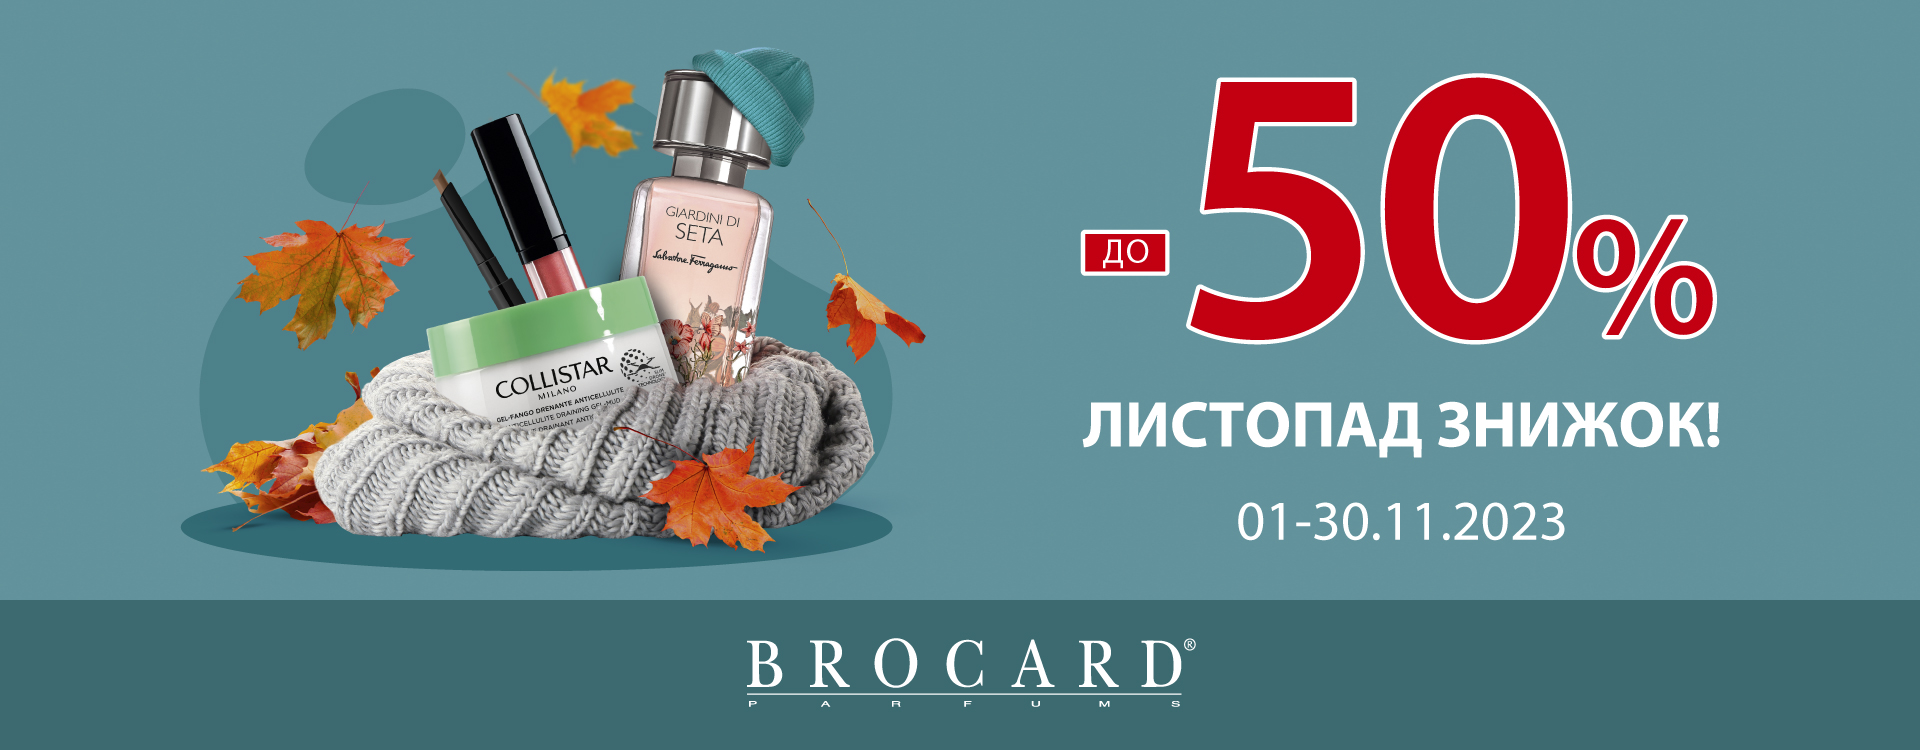 November discounts up to 50% in BROCARD